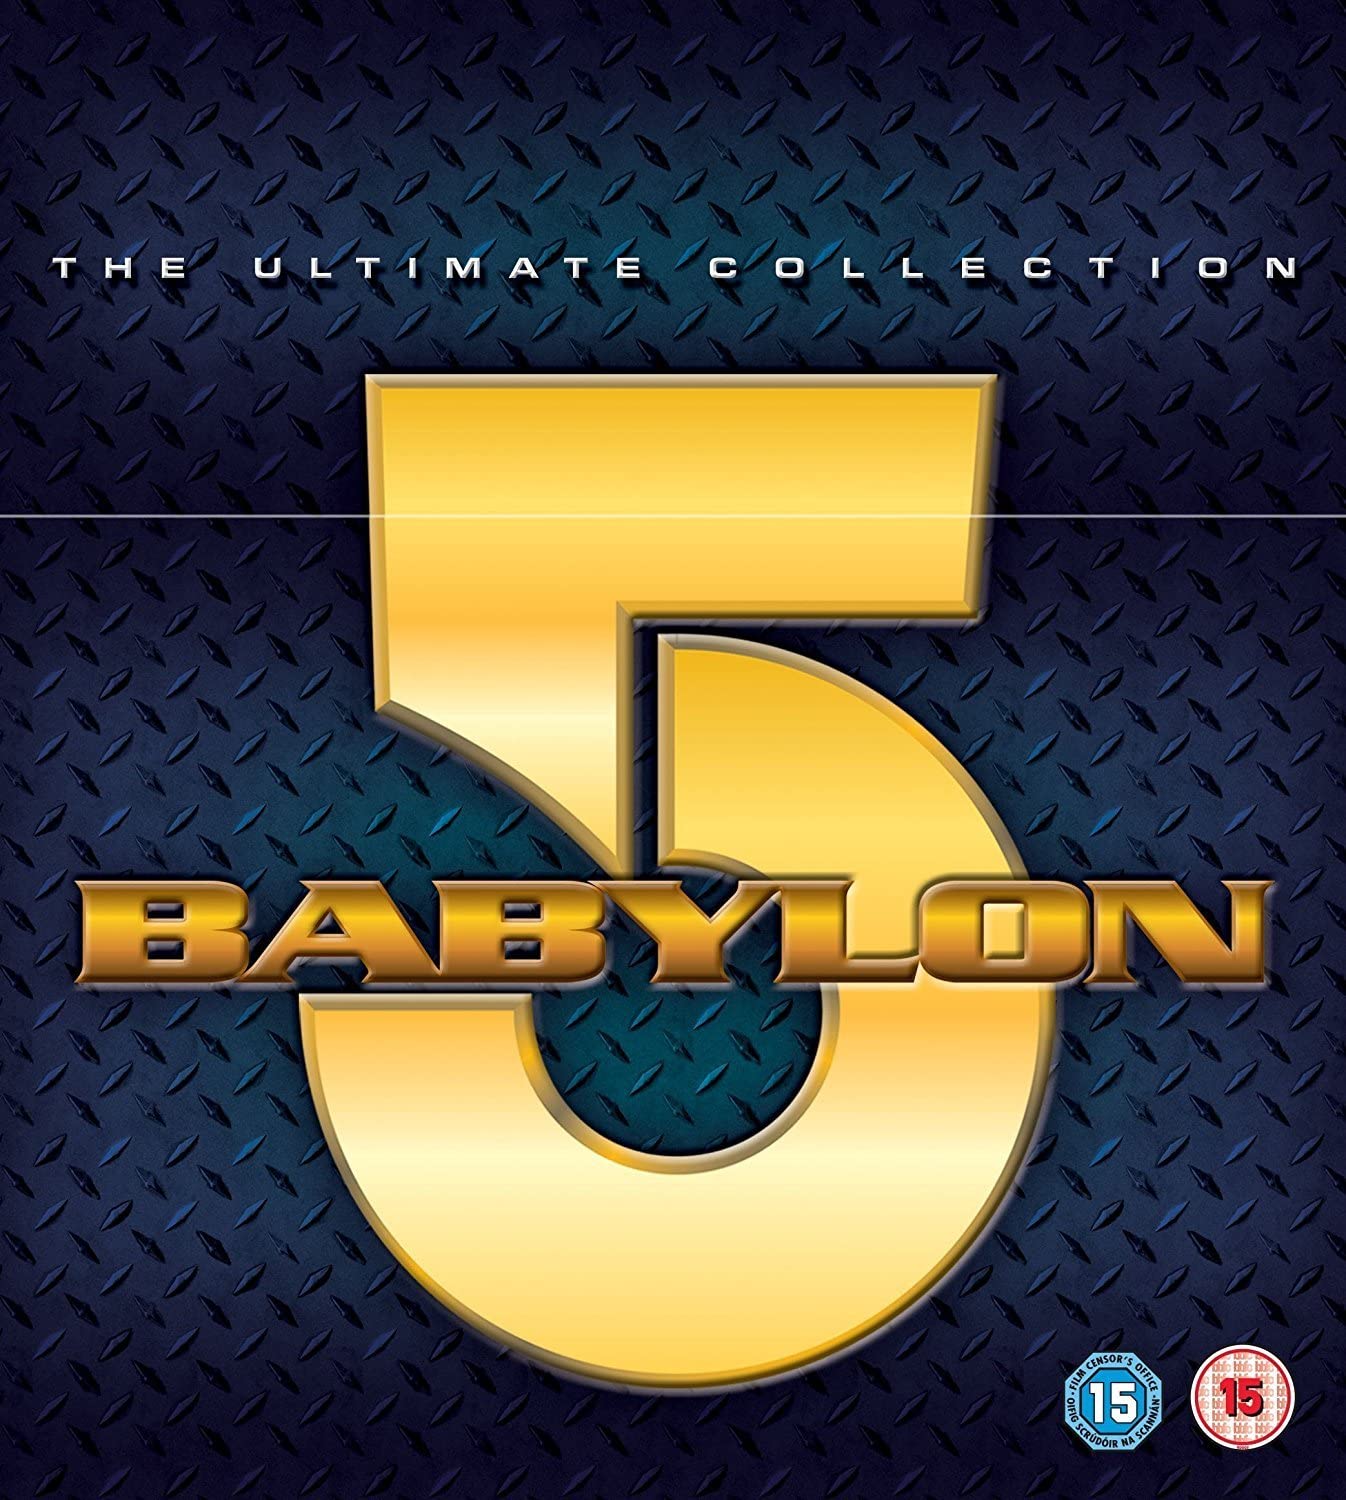 Babylon 5: The Ultimate Collection + The Lost Tales [1994] (DVD)